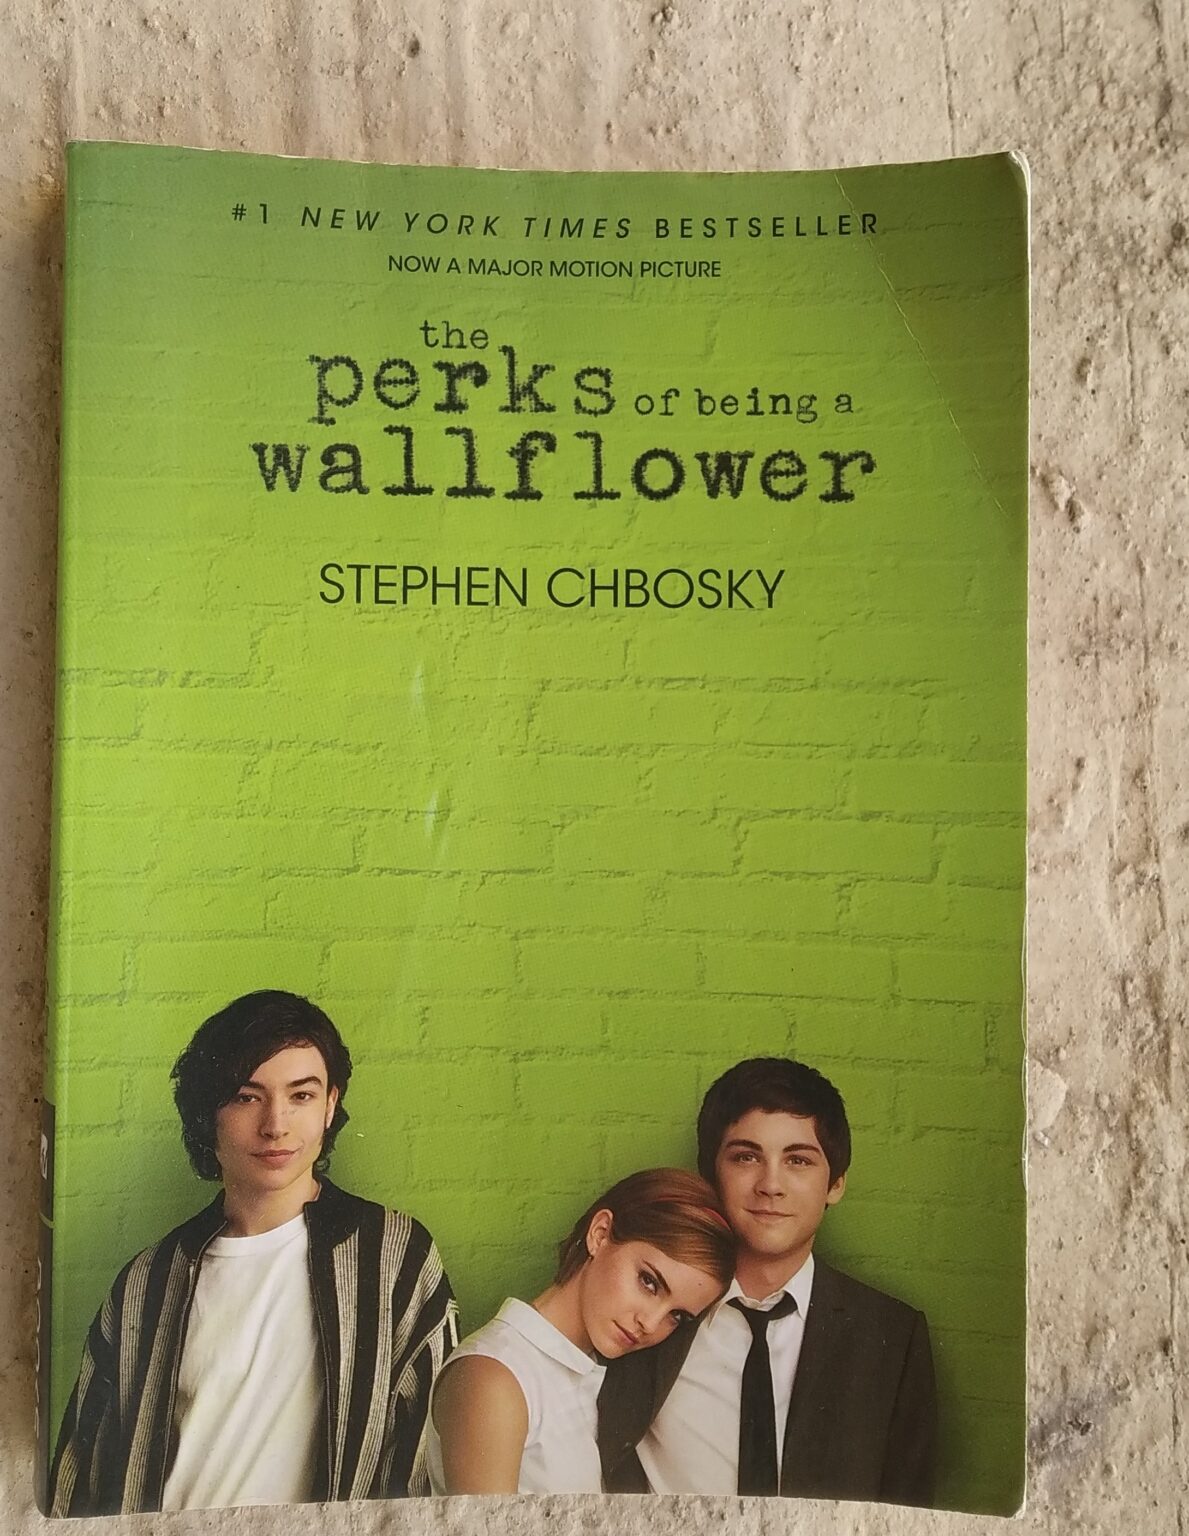 the perks of being a wallflower book author